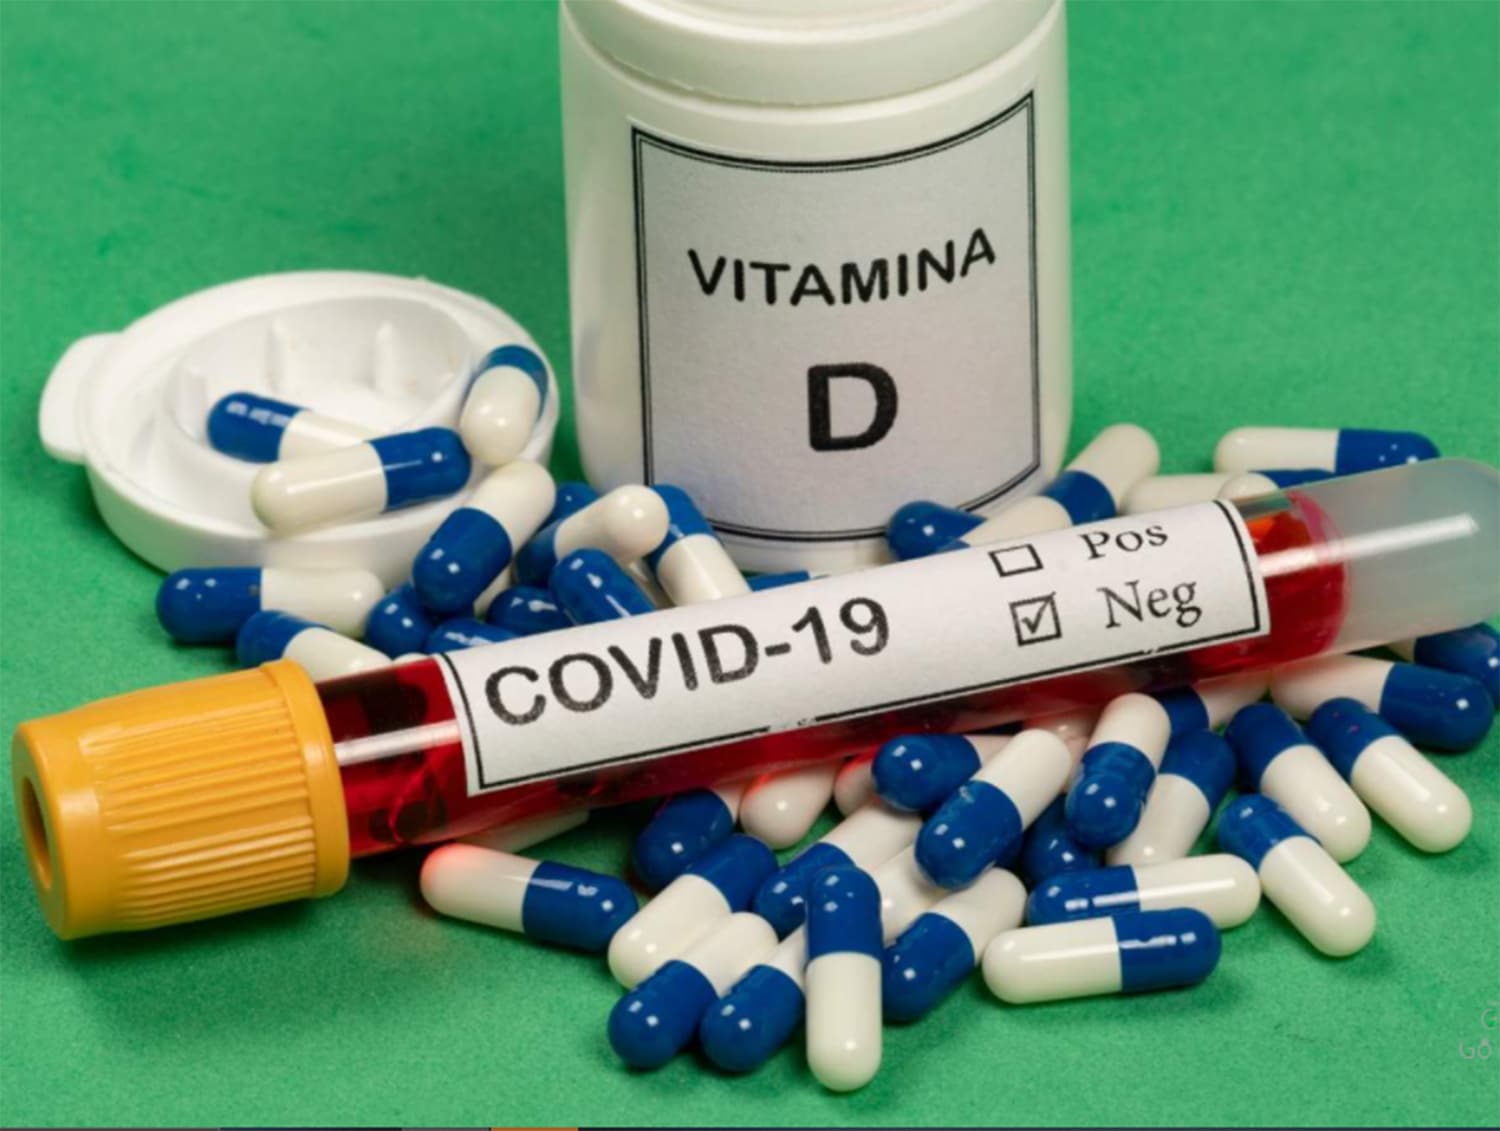 Raising vitamin D levels through supplementation may not improve COVID-19 outcomes